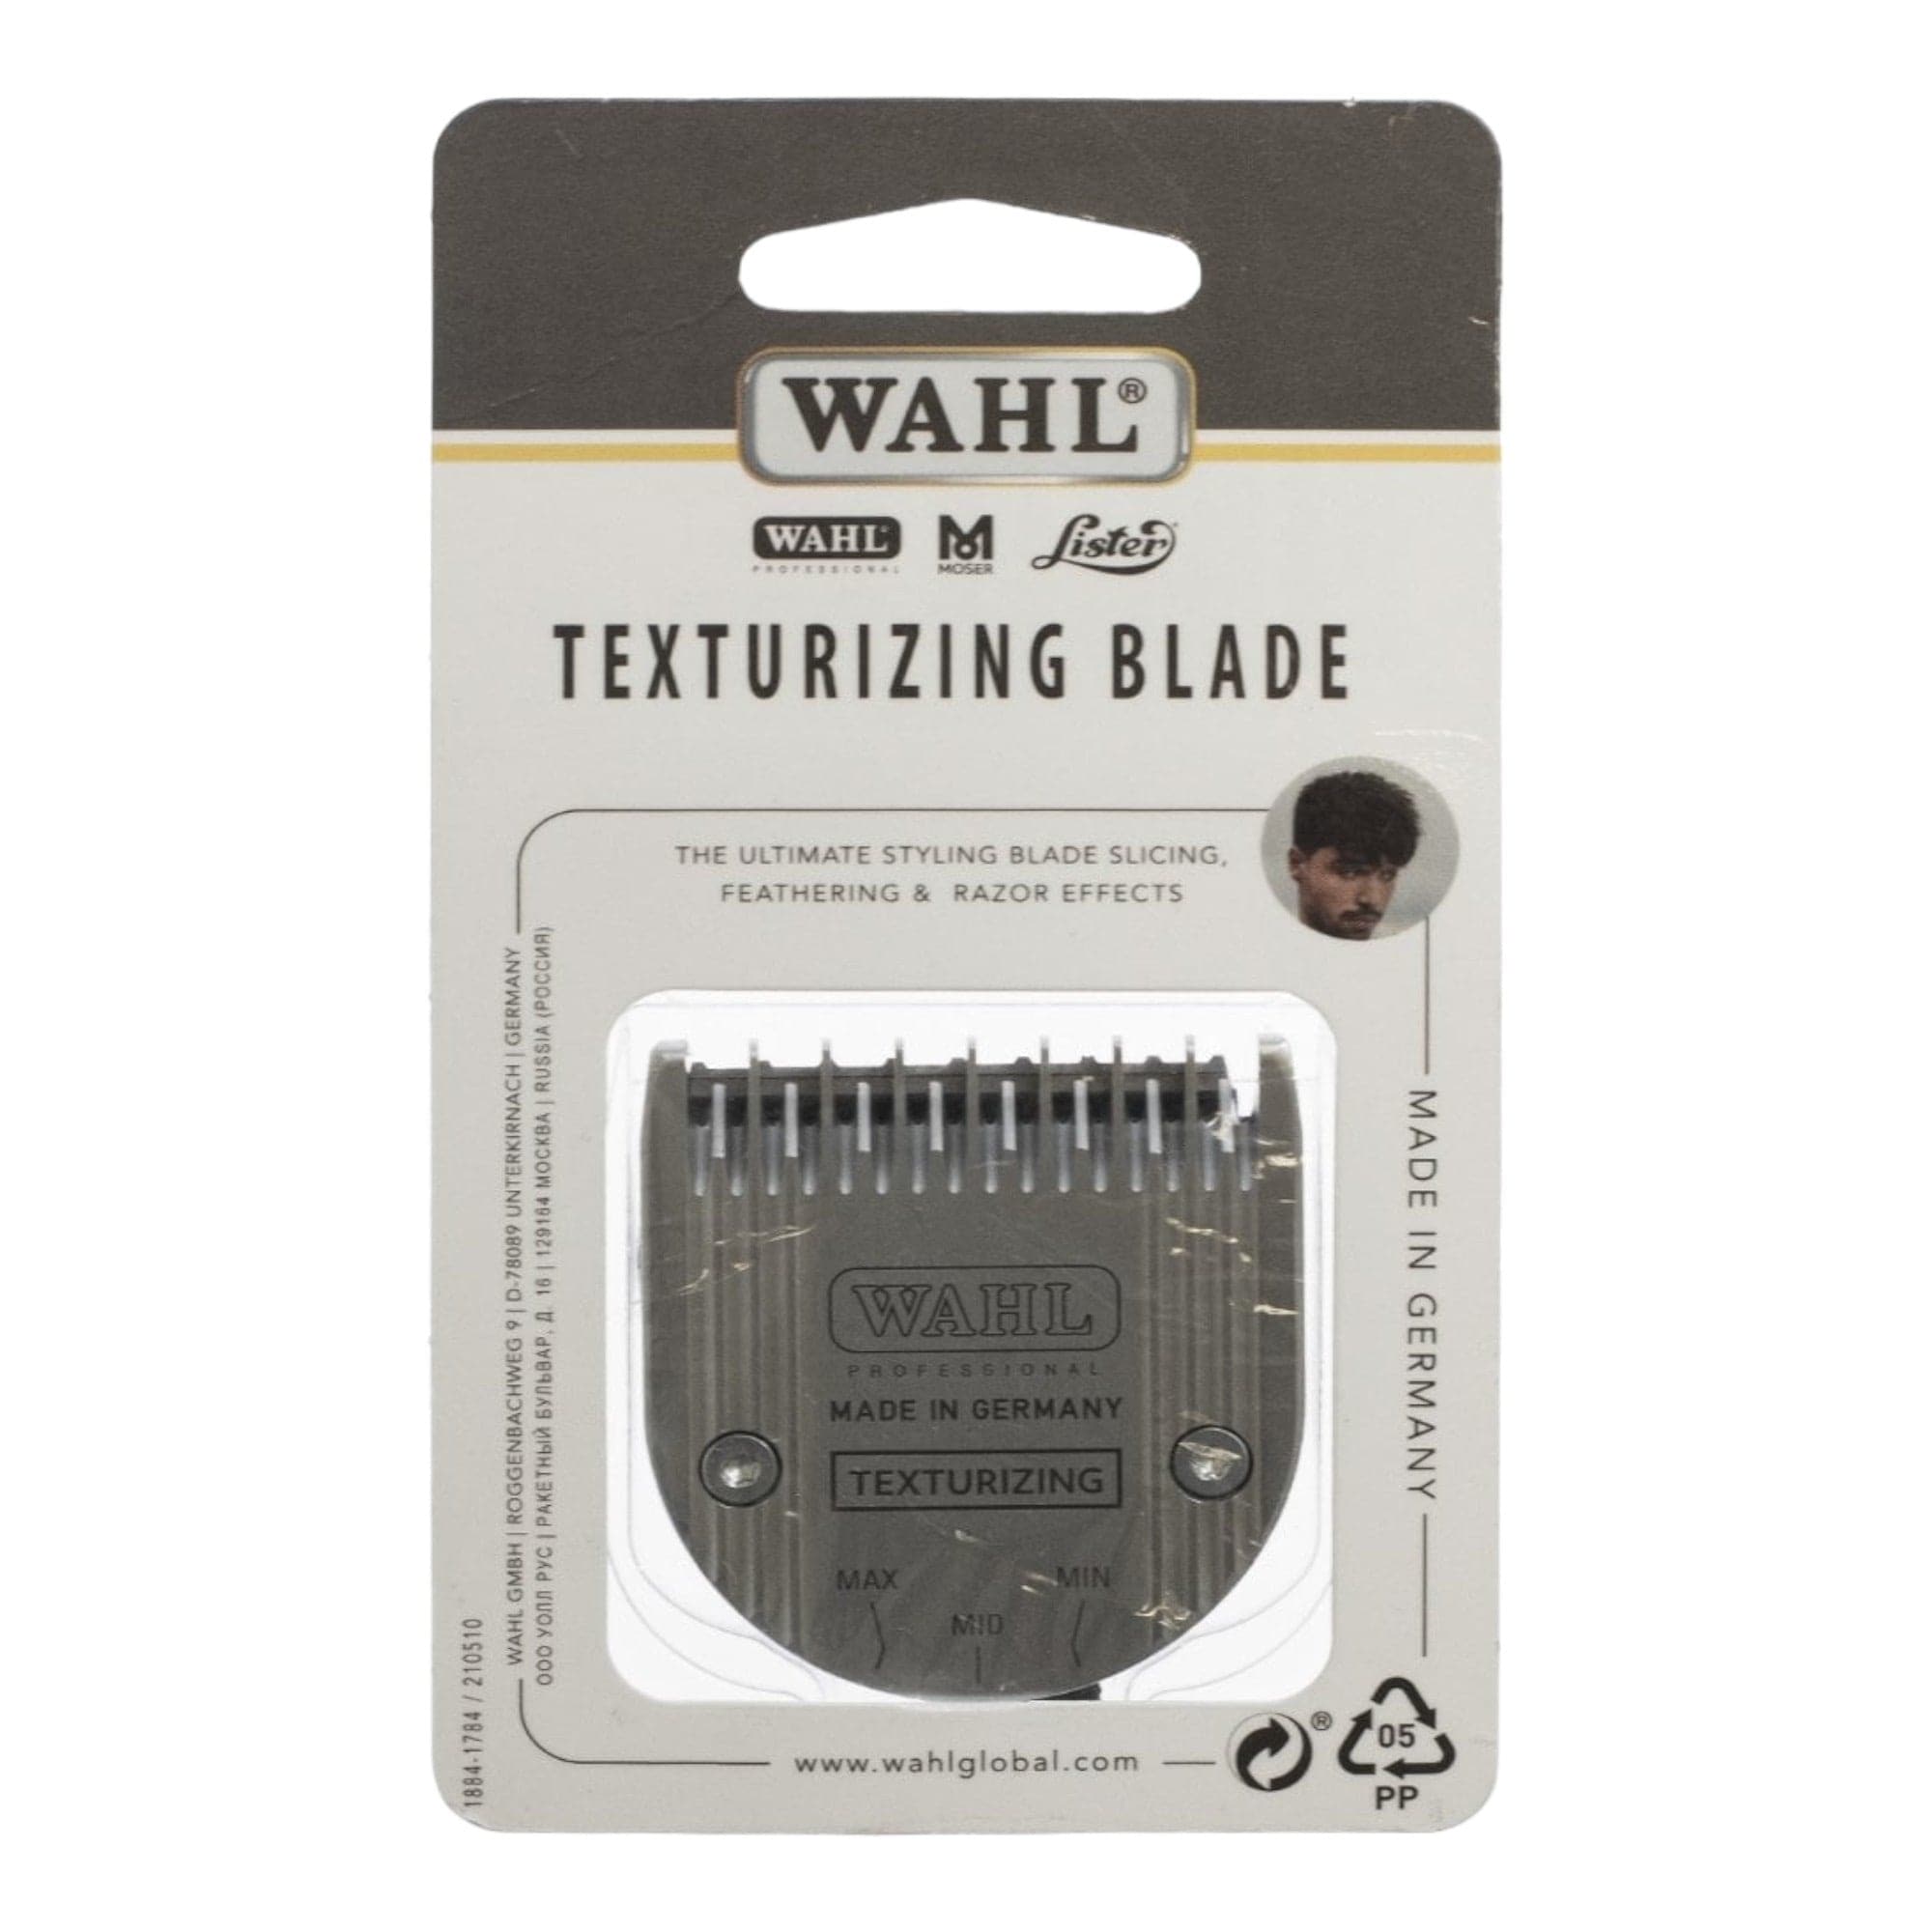 Wahl - Texturizing All in One Blade 1854-7461